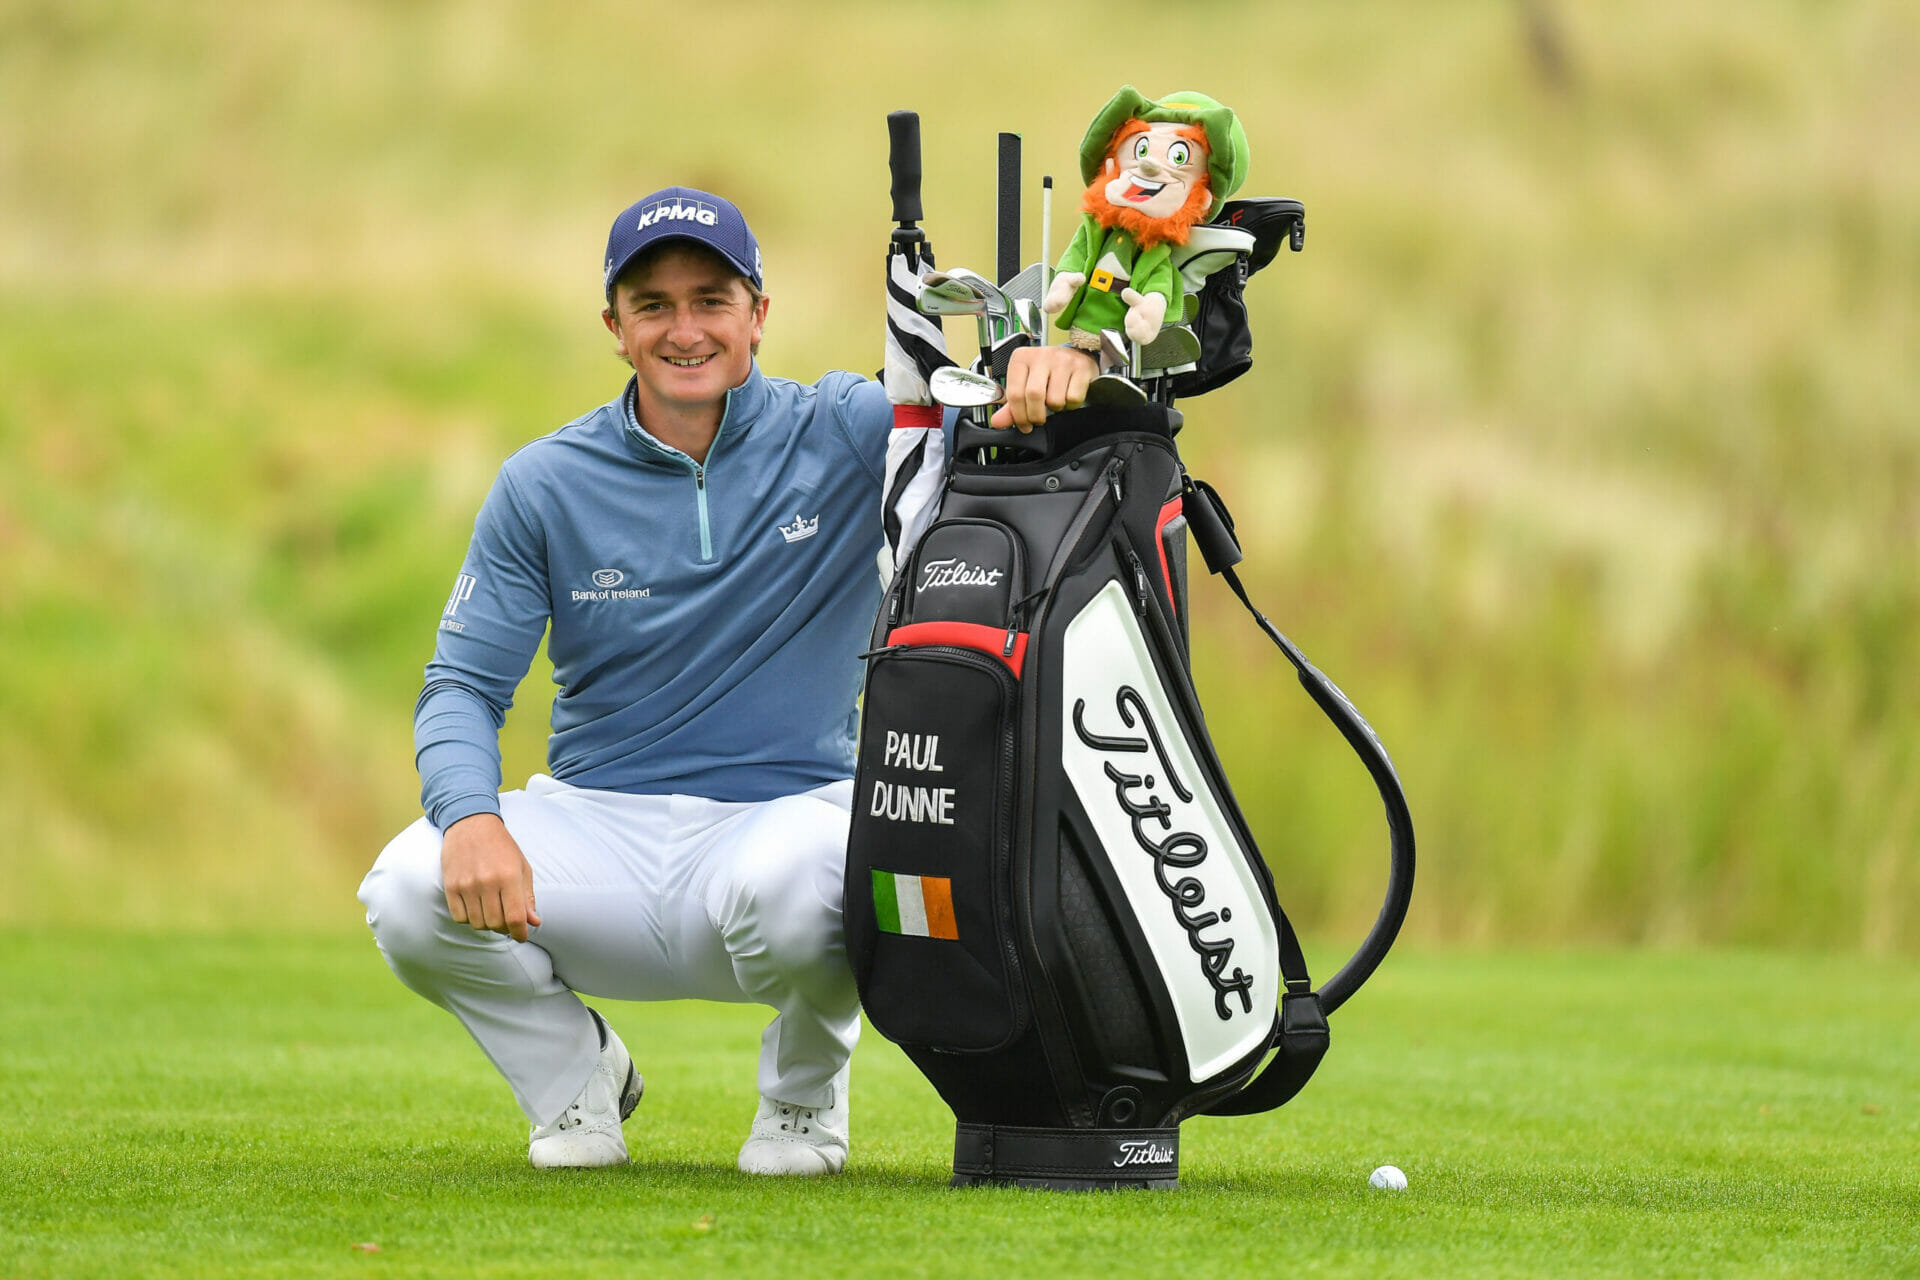 Paul Dunne reflects on a great 2017 ahead of EurAsia Cup